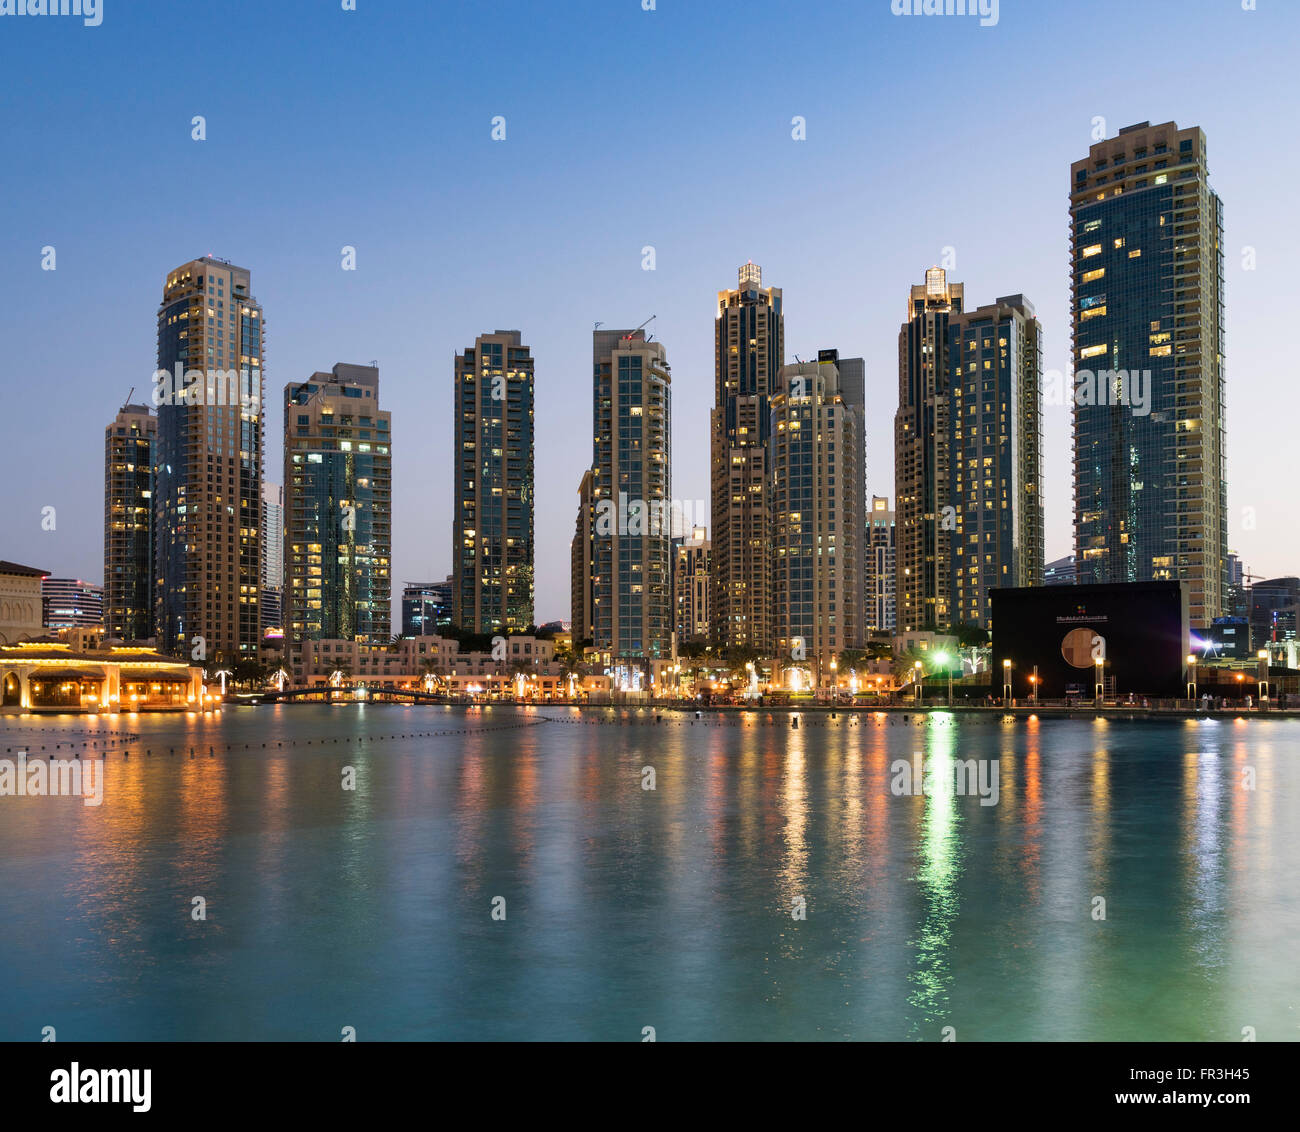 Night view of many high-rise luxury apartment towers in Downtown Dubai United Arab Emirates Stock Photo